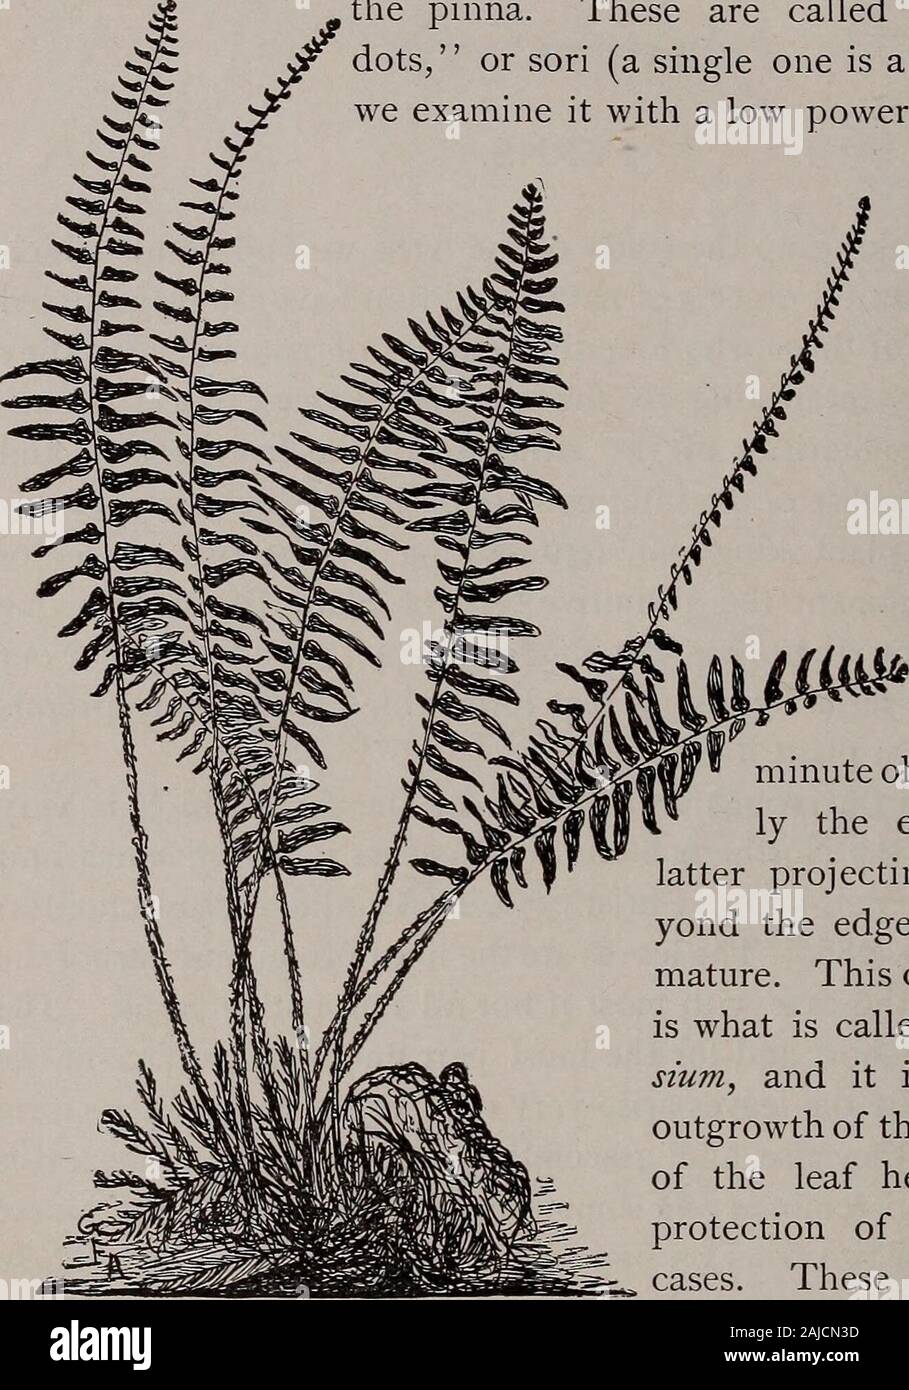 Elementary botany . OG Y. middle portion toward the end. This is because of the shorterpinnae here. 531. Fruit dots (sorus, indusium).—If we examine theunder side of such short pinnae of the Christmas fern we see thatthere are two rows of small circular dots, one row on either side ofthe pinna. These are called the fruitdots, or sori (a single one is a sorus). Ifwe examine it with a low power of the mi-croscope,or with ap o c k e tlens, wesee thatthere is aci re ulardisk whichc o versmore orless com-pletelyveryminute objects,usual-ly the ends of thelatter projecting just be-yond the edge if th Stock Photo